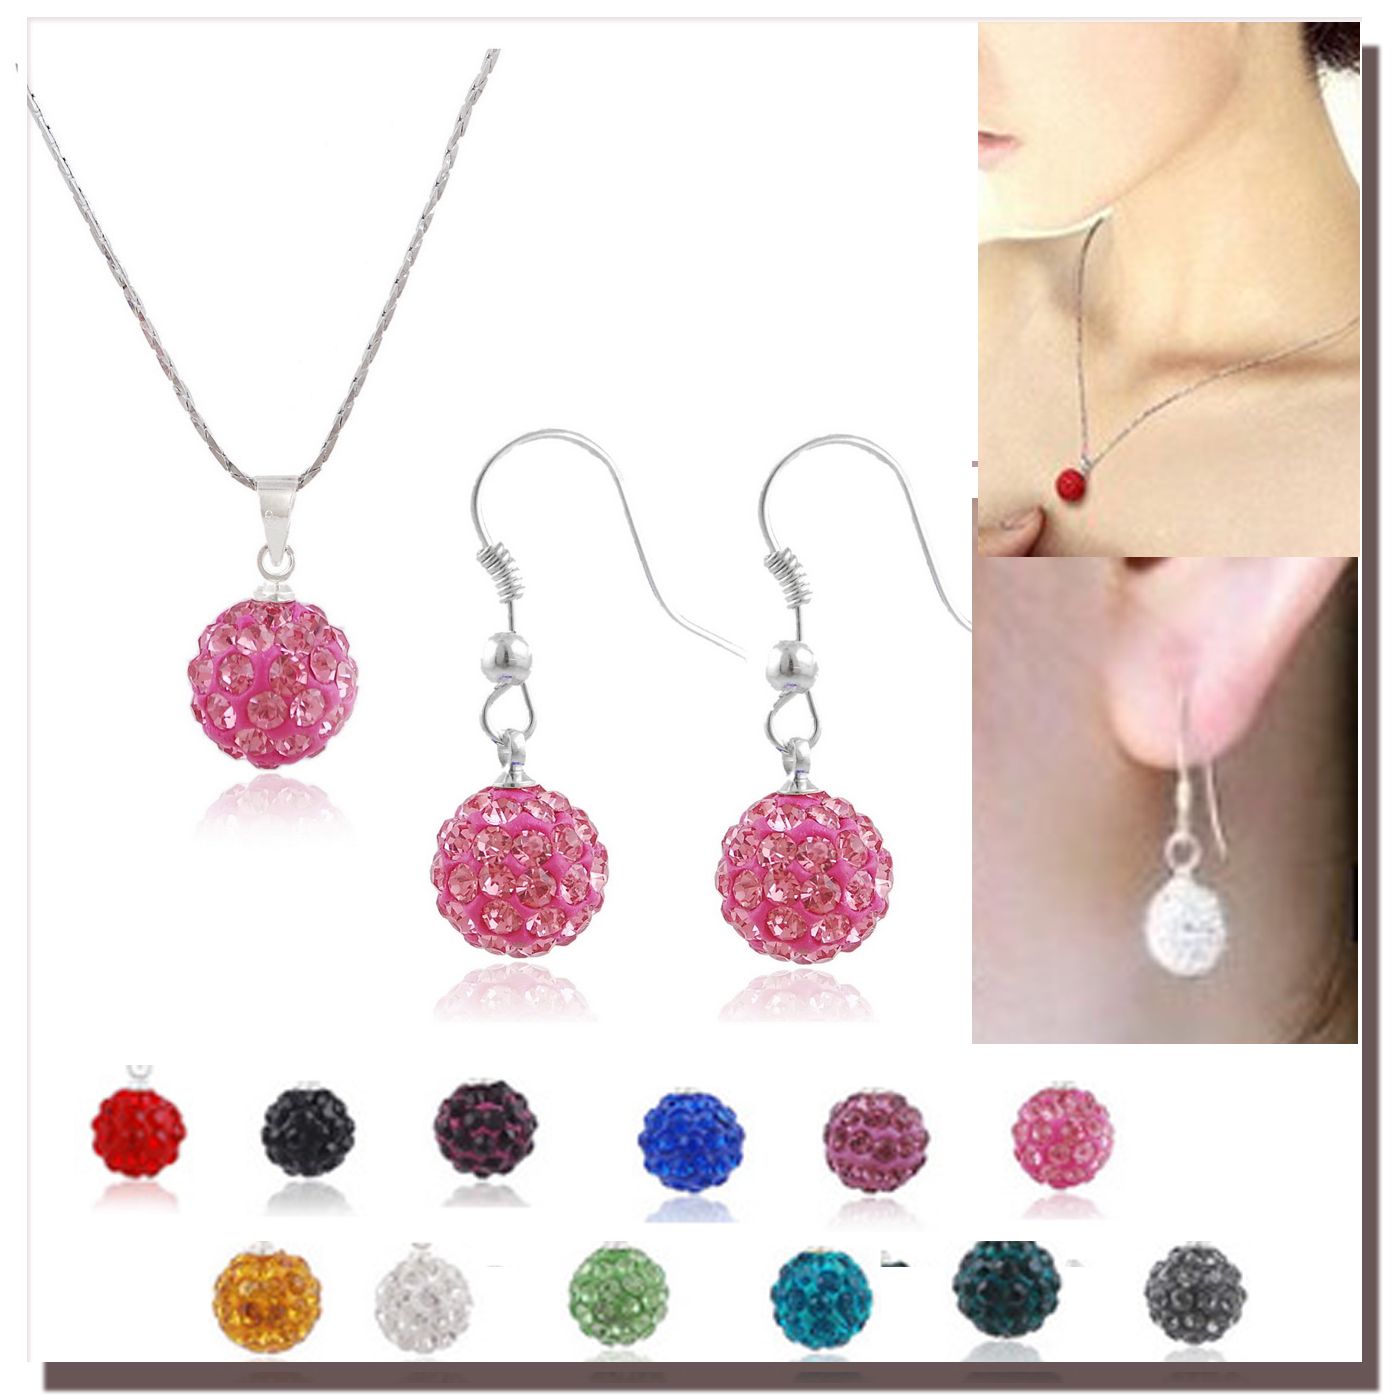 Disco Crystal Ball Bead Charms Necklace Earrings Fashion Ladies